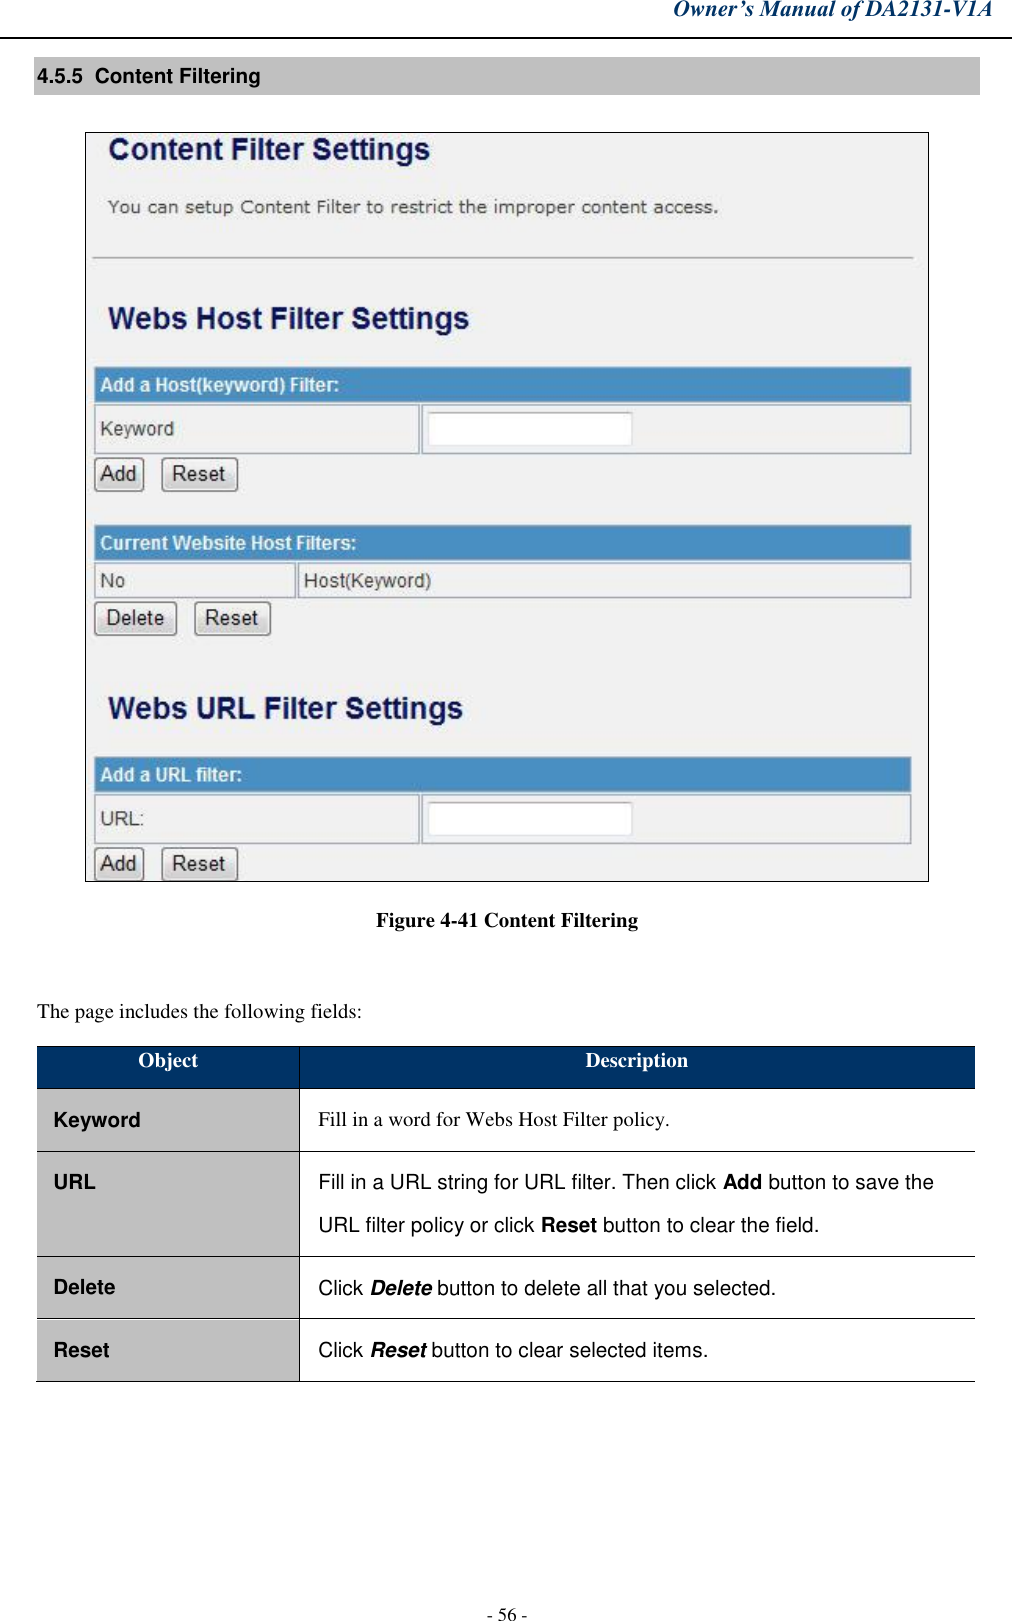 Owner’s Manual of DA2131-V1A - 56 - 4.5.5  Content Filtering Figure 4-41 Content Filtering The page includes the following fields: Object Description Keyword Fill in a word for Webs Host Filter policy. URL Fill in a URL string for URL filter. Then click Add button to save the URL filter policy or click Reset button to clear the field. Delete Click Delete button to delete all that you selected. Reset Click Reset button to clear selected items. 